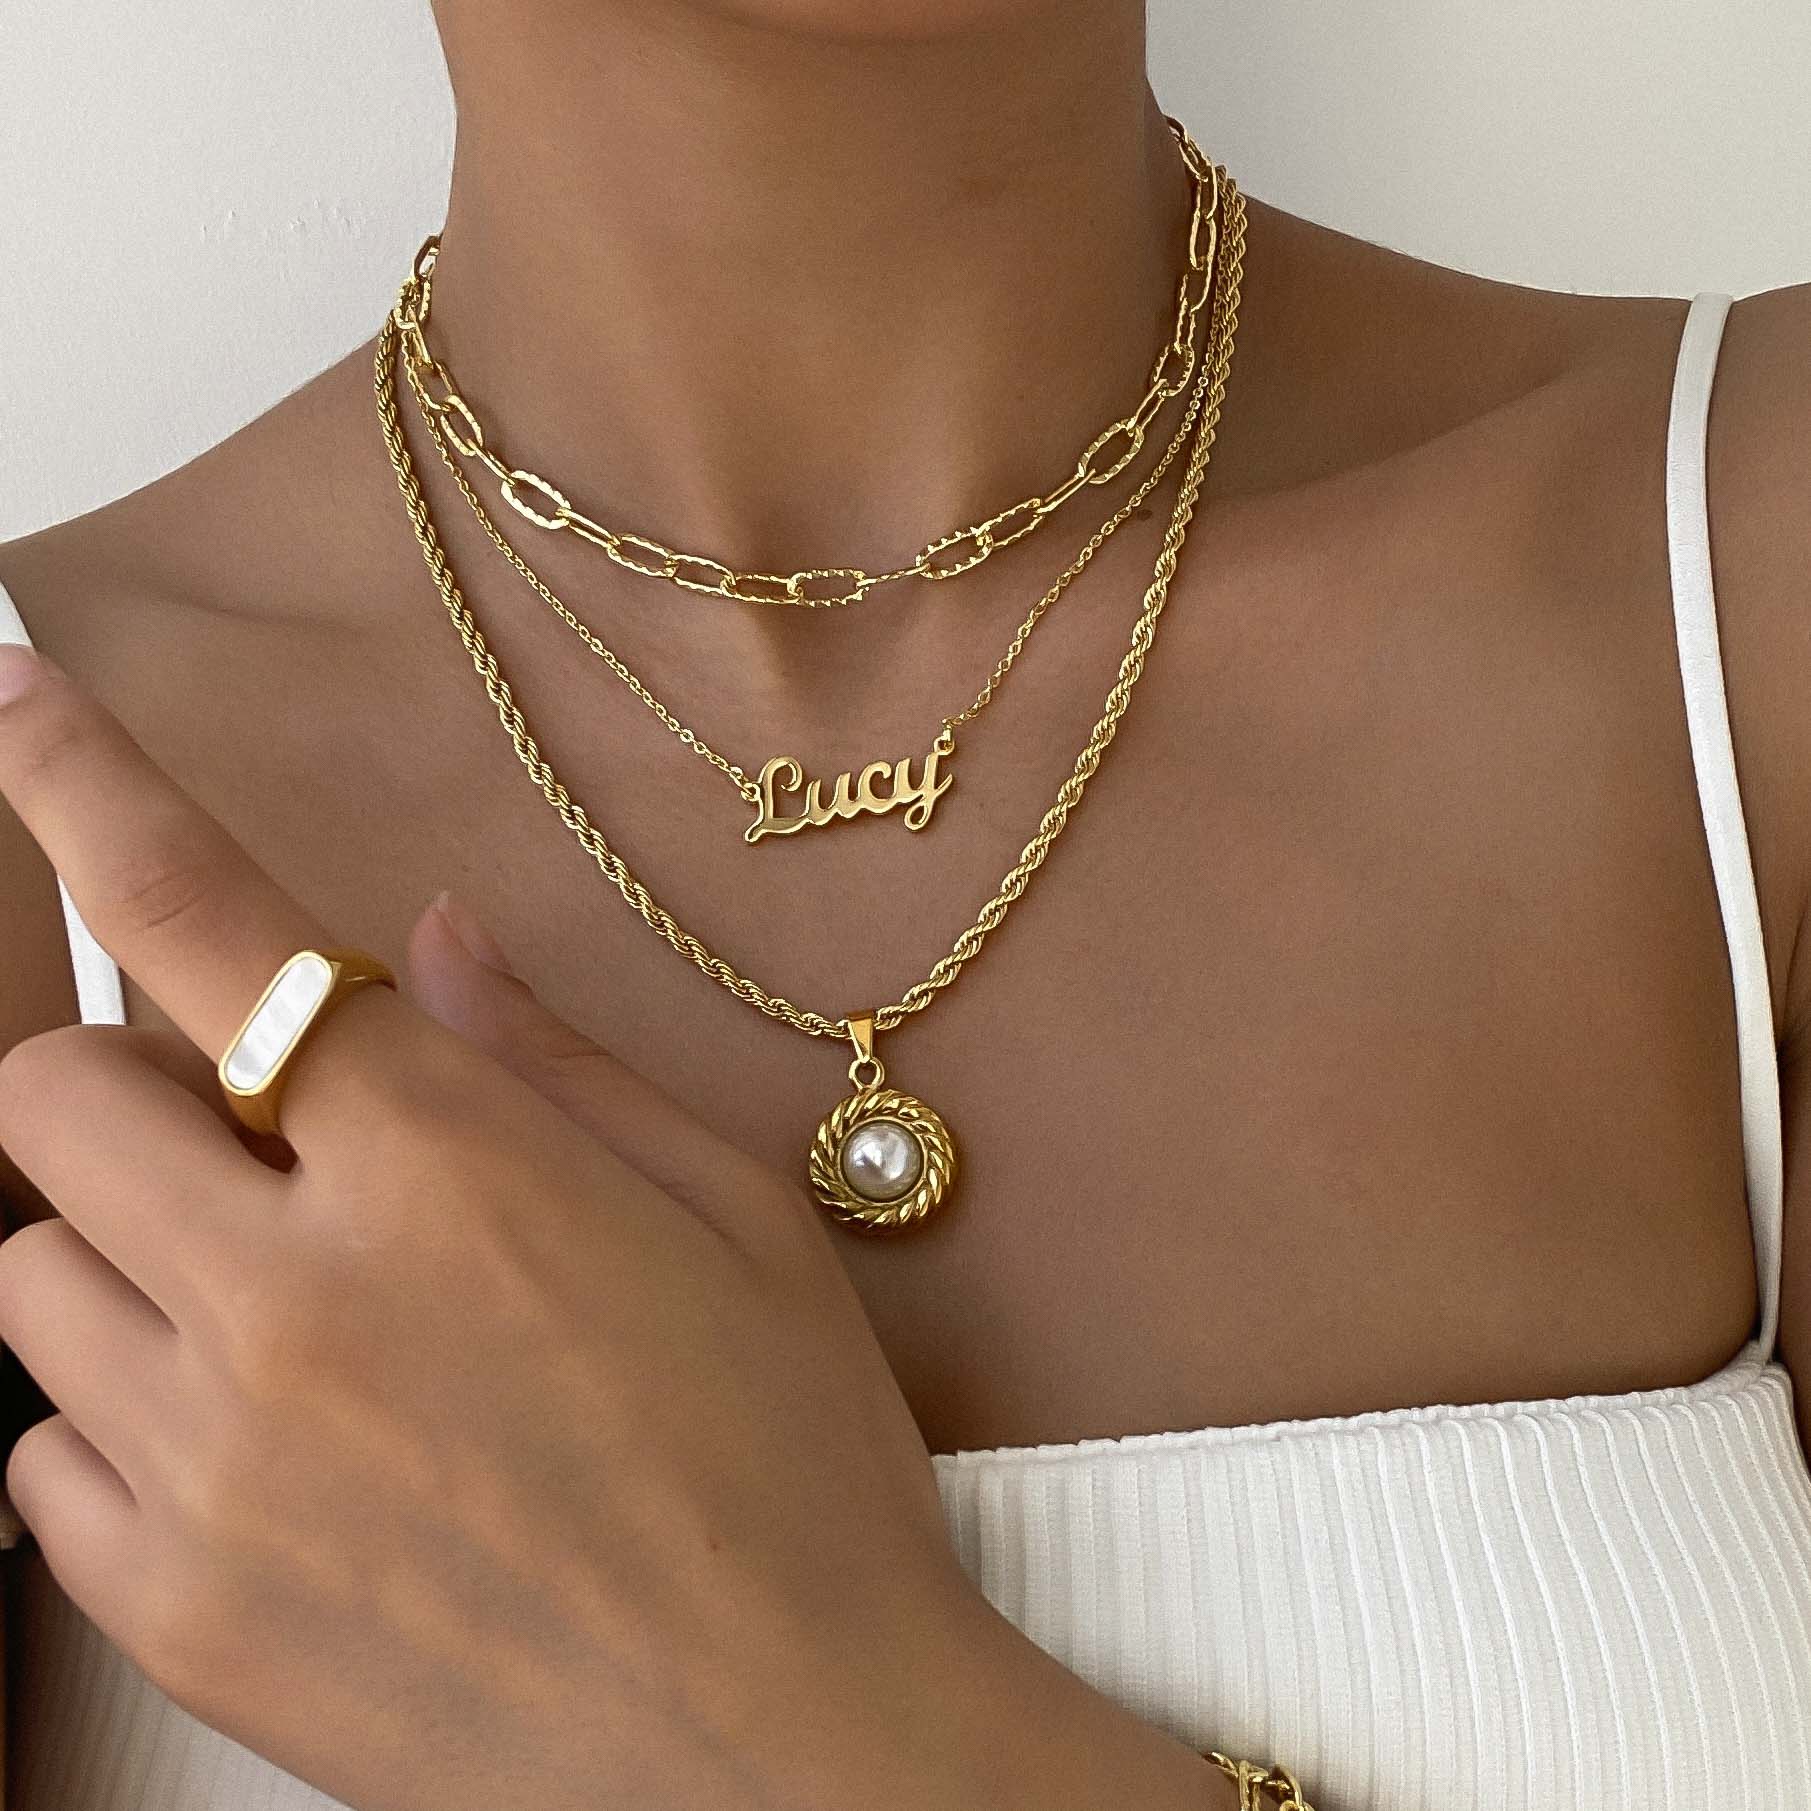 Woman wearing custom name necklace, gold pendant necklace and paperclip chain as well as a woman’s signet ring